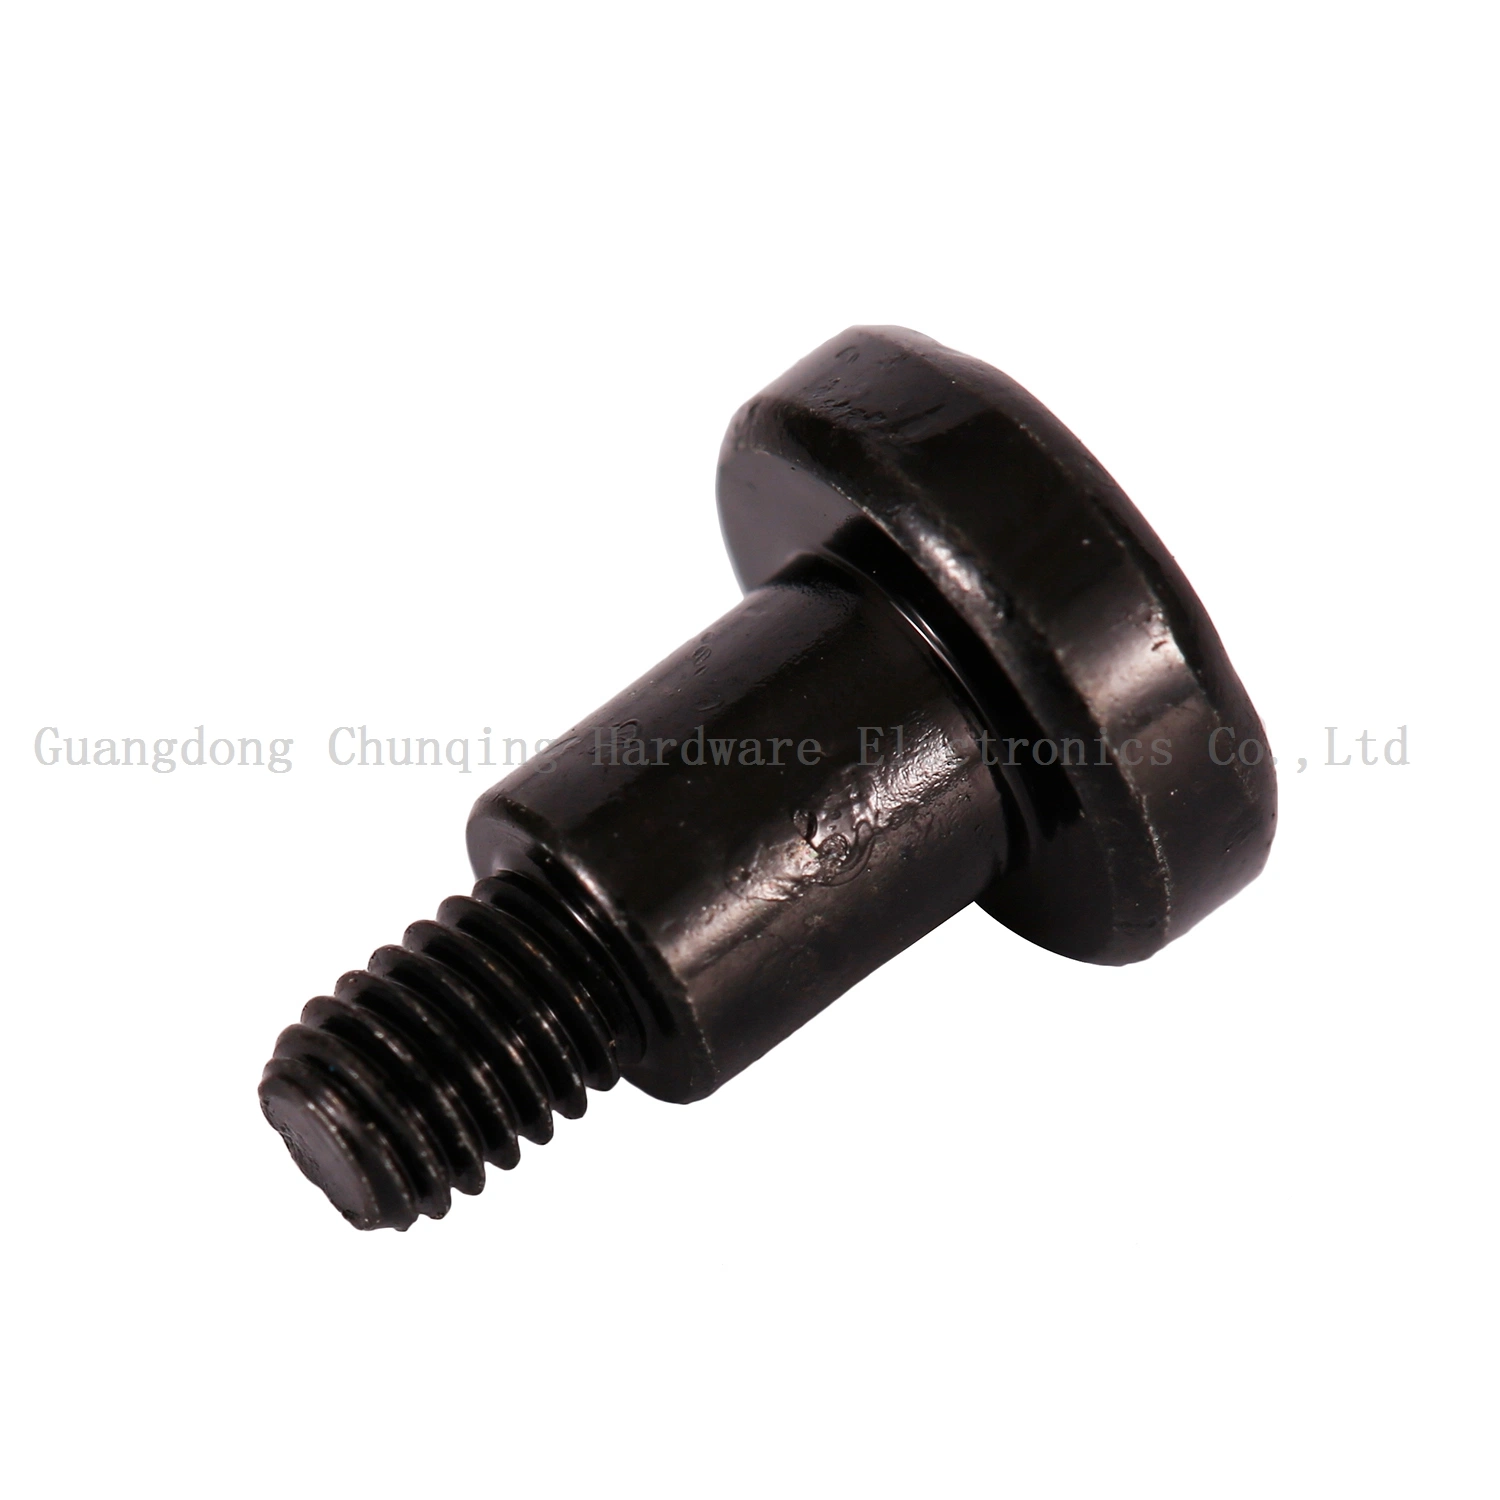 Fasteners DIN Furniture Hardware Thread Rod Bolt and Nuts with Good Price